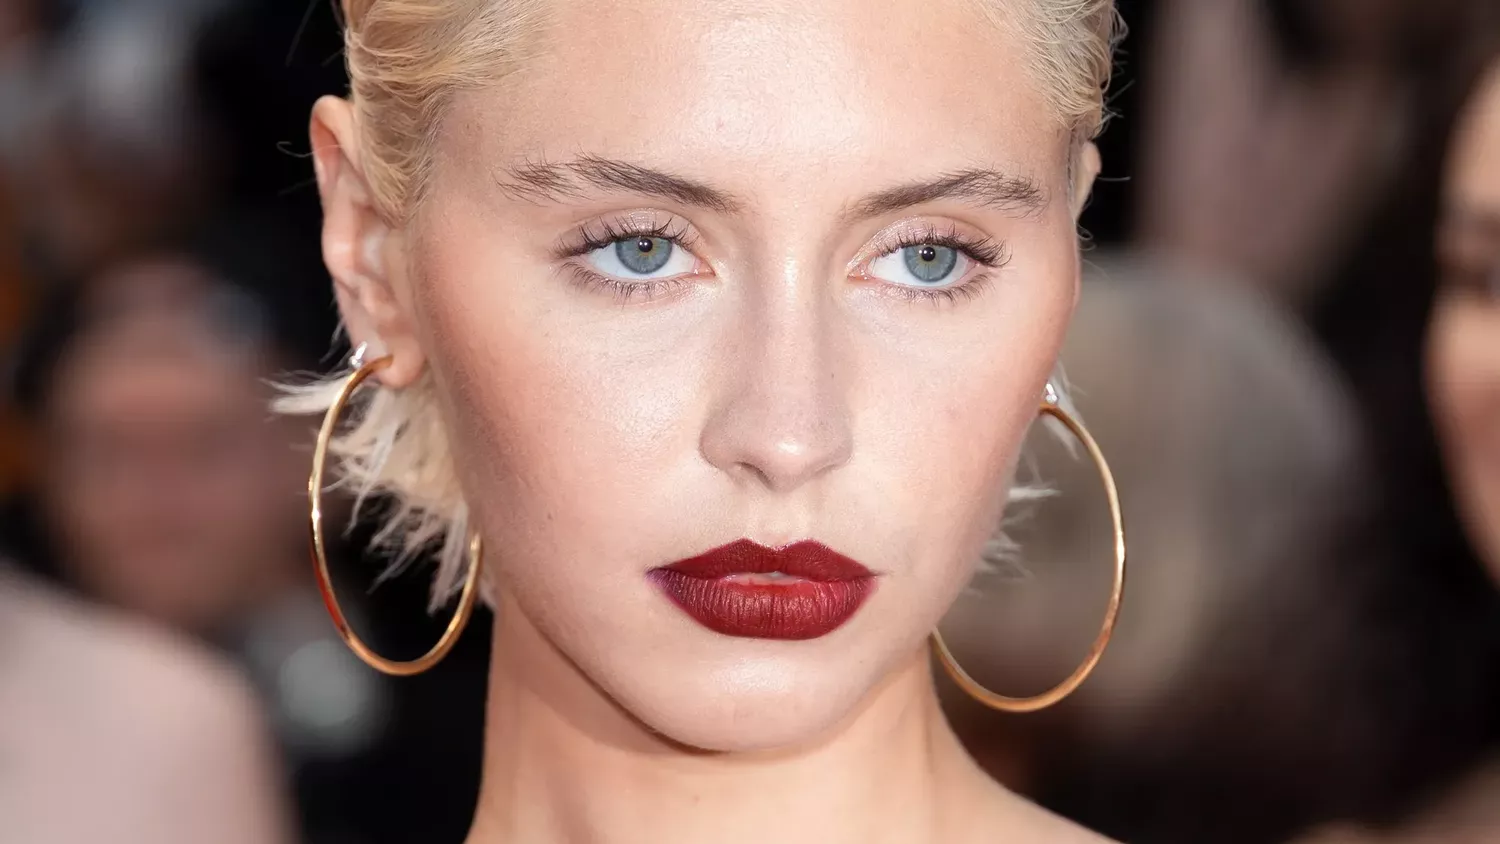 Cannes Film Festival 2023: Every Super Glam Celebrity Hair And Make-Up Look